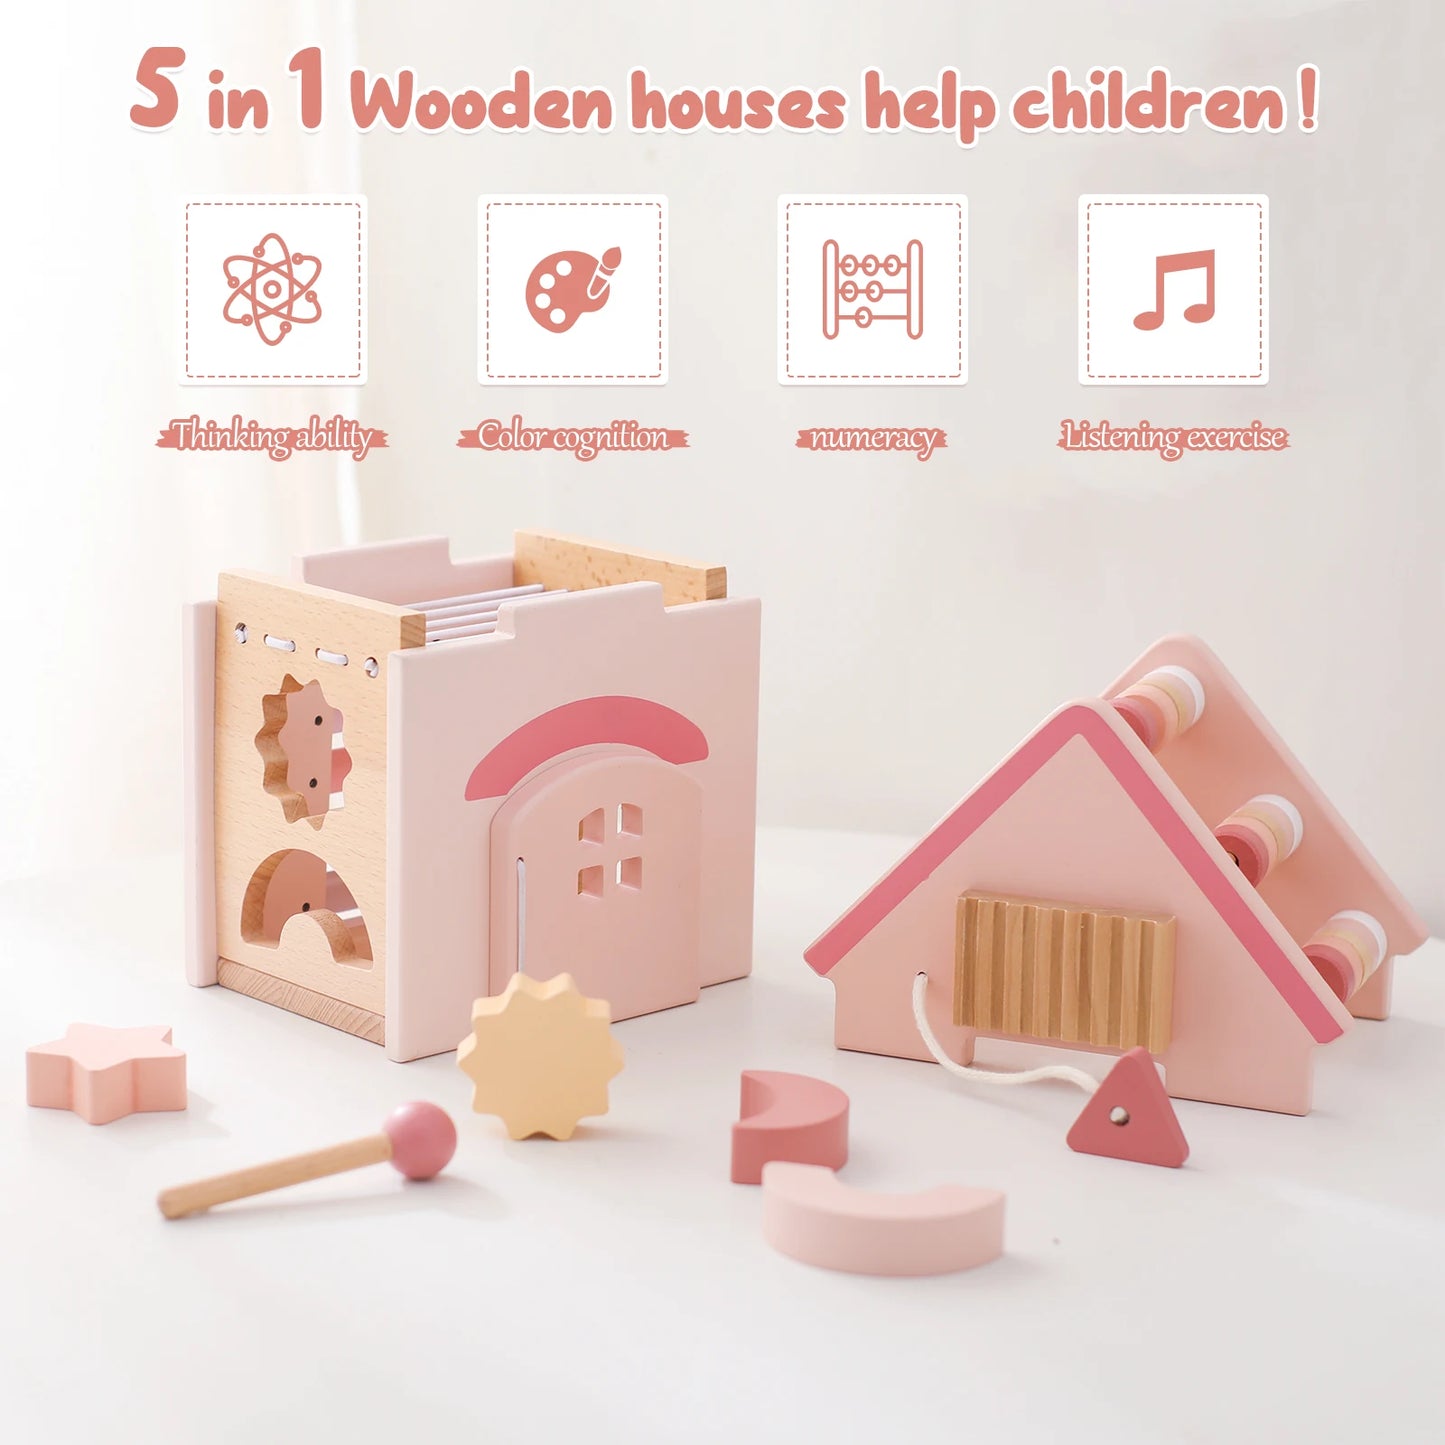 Wooden Montessori Educational Busy House Toy